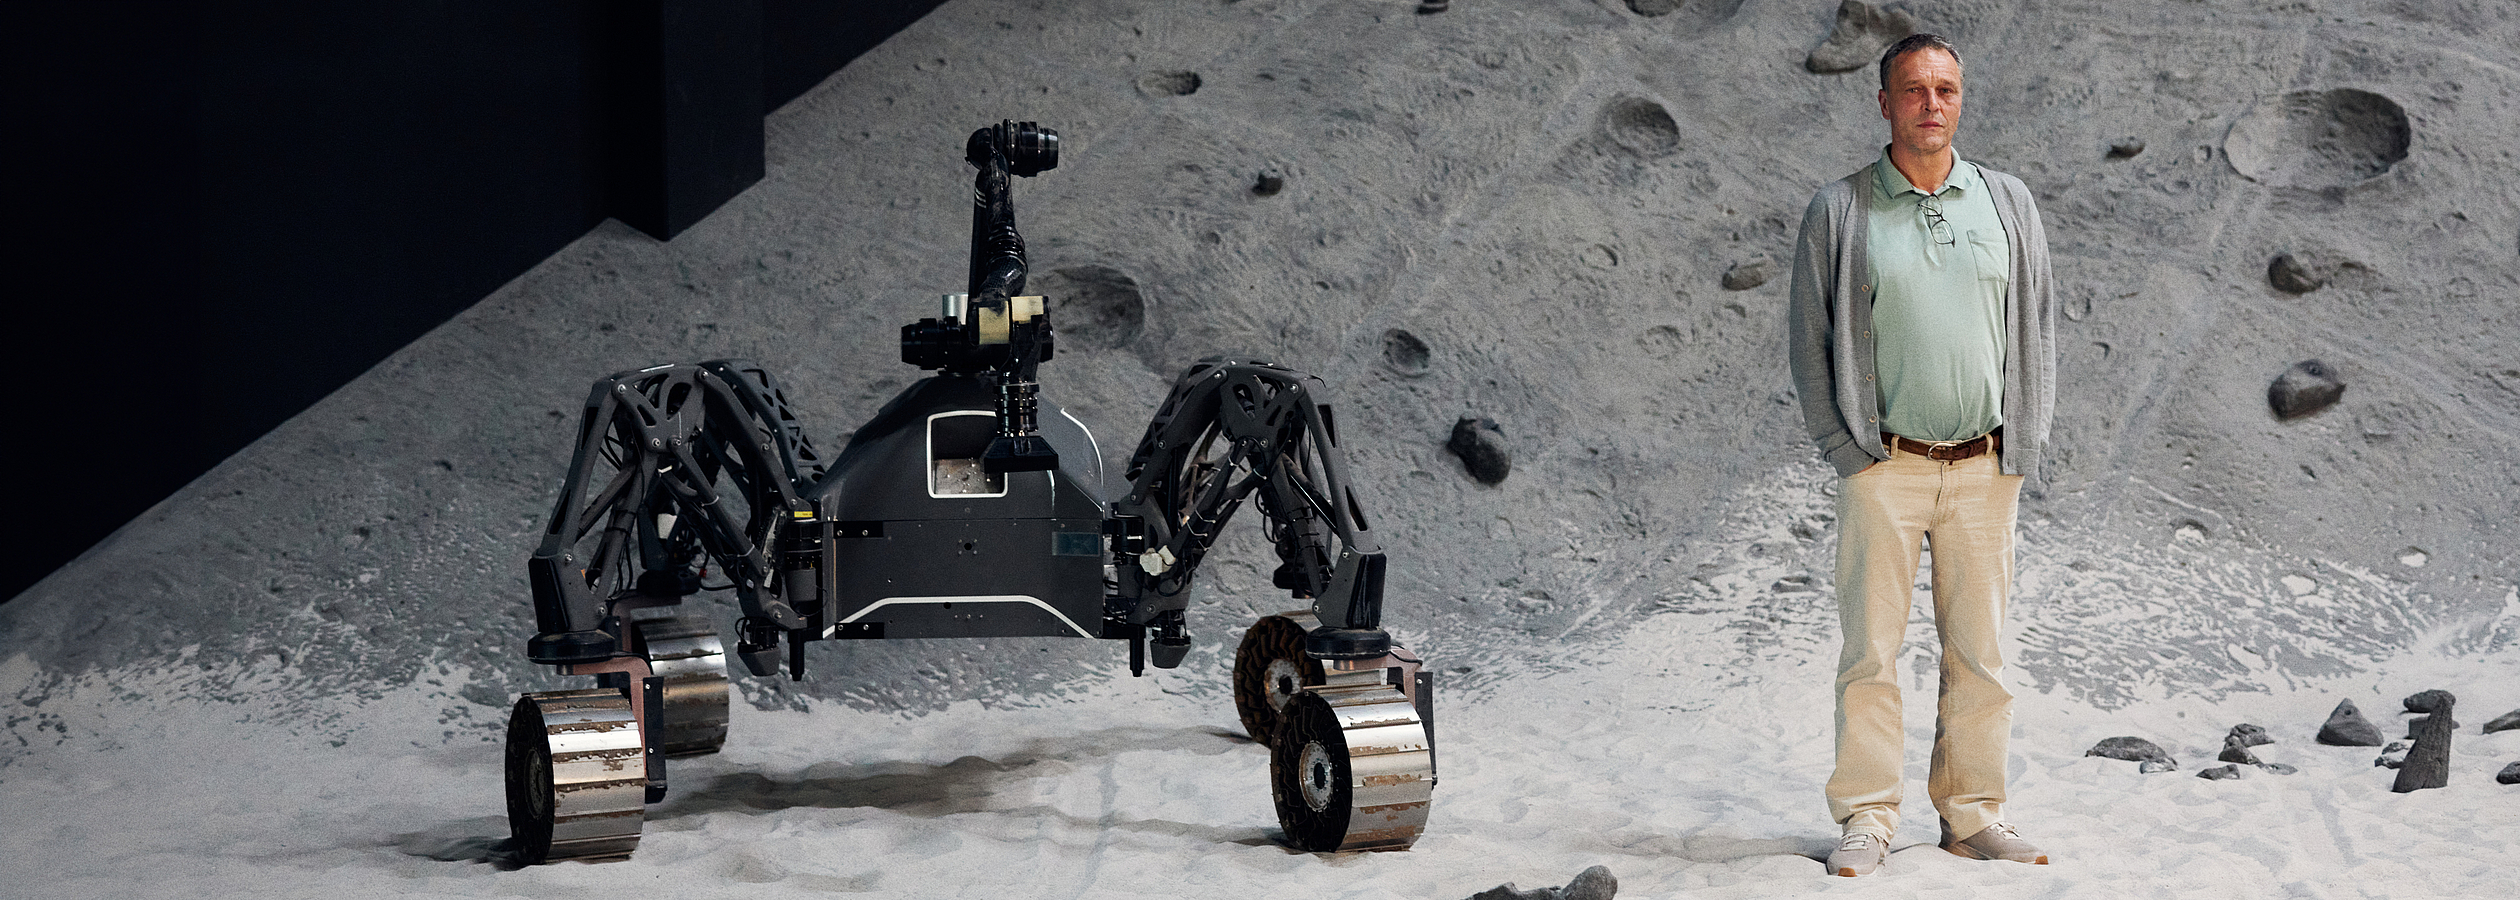 Frank Kirchner next to a robot on Moon like surface